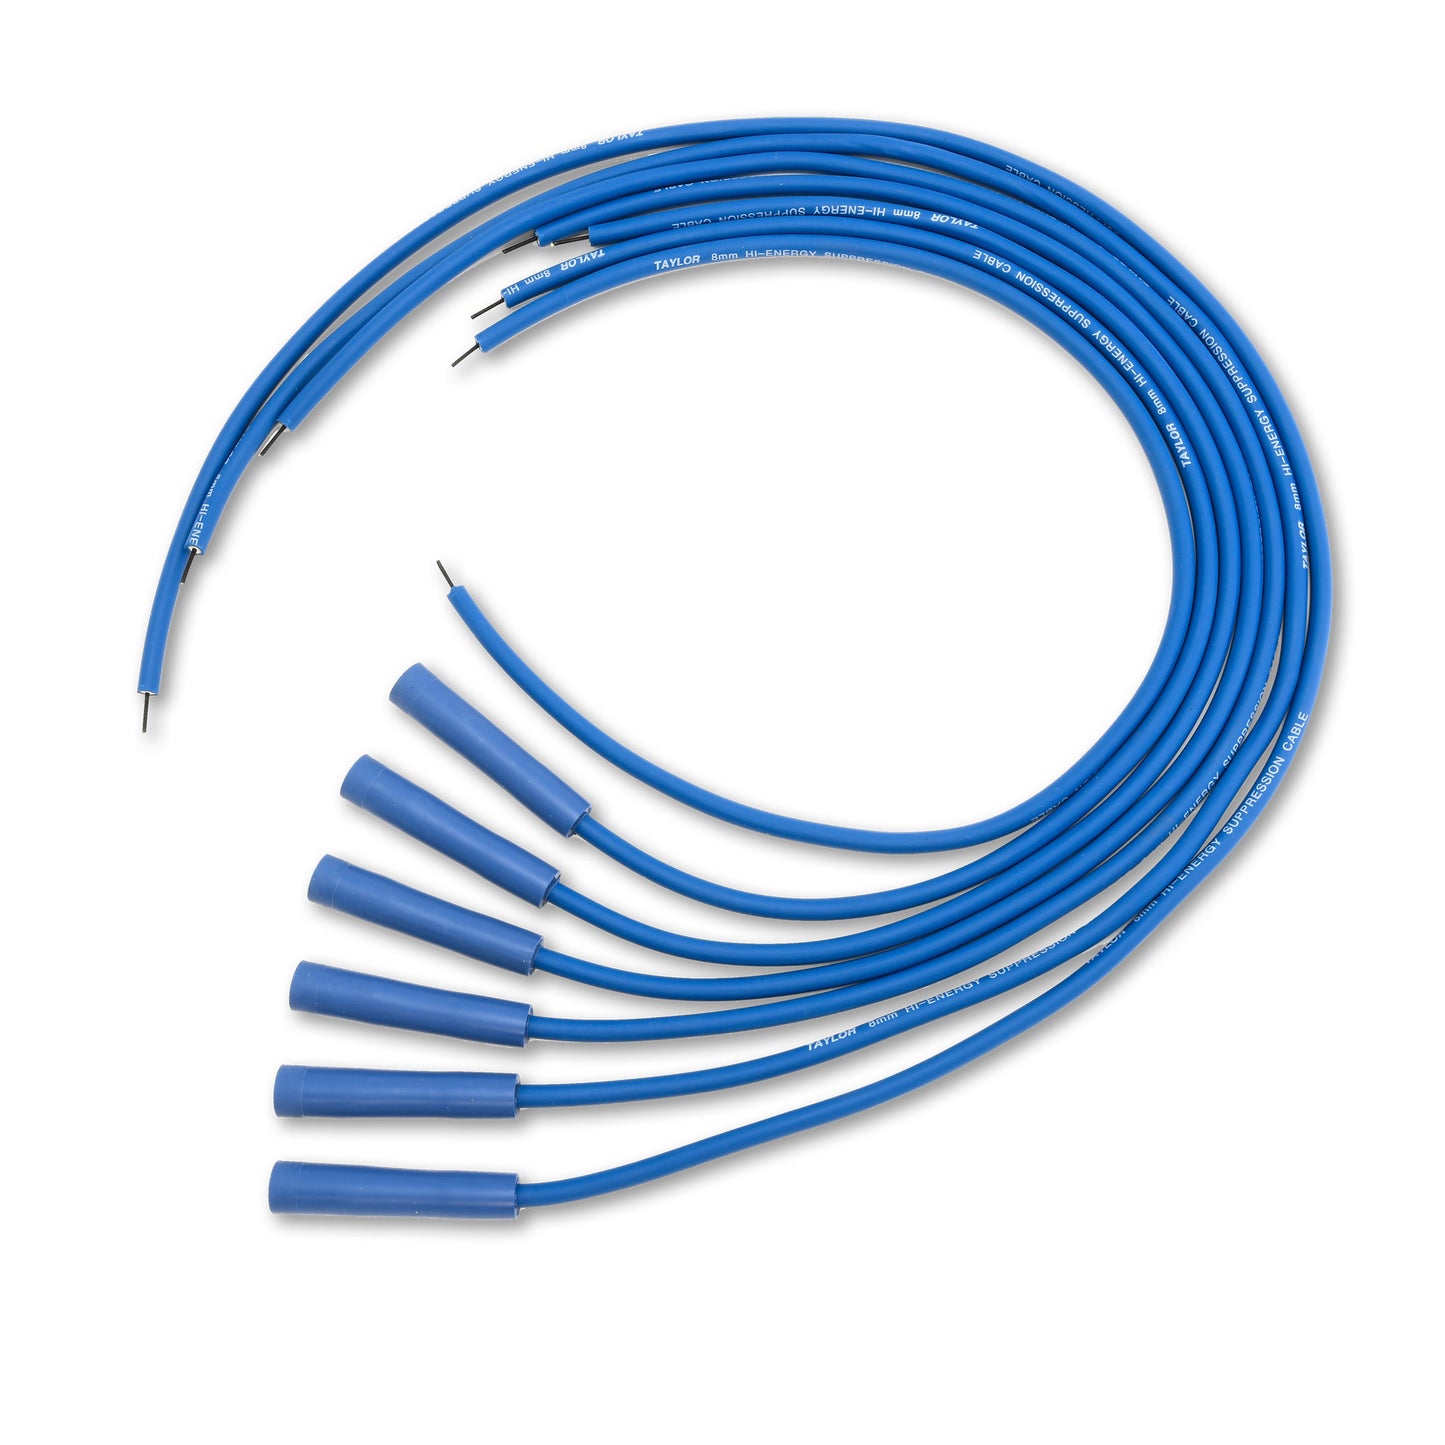 Taylor Cable 60645 8mm hi-energy Ignition Wires univ 6cyl 180 res blue